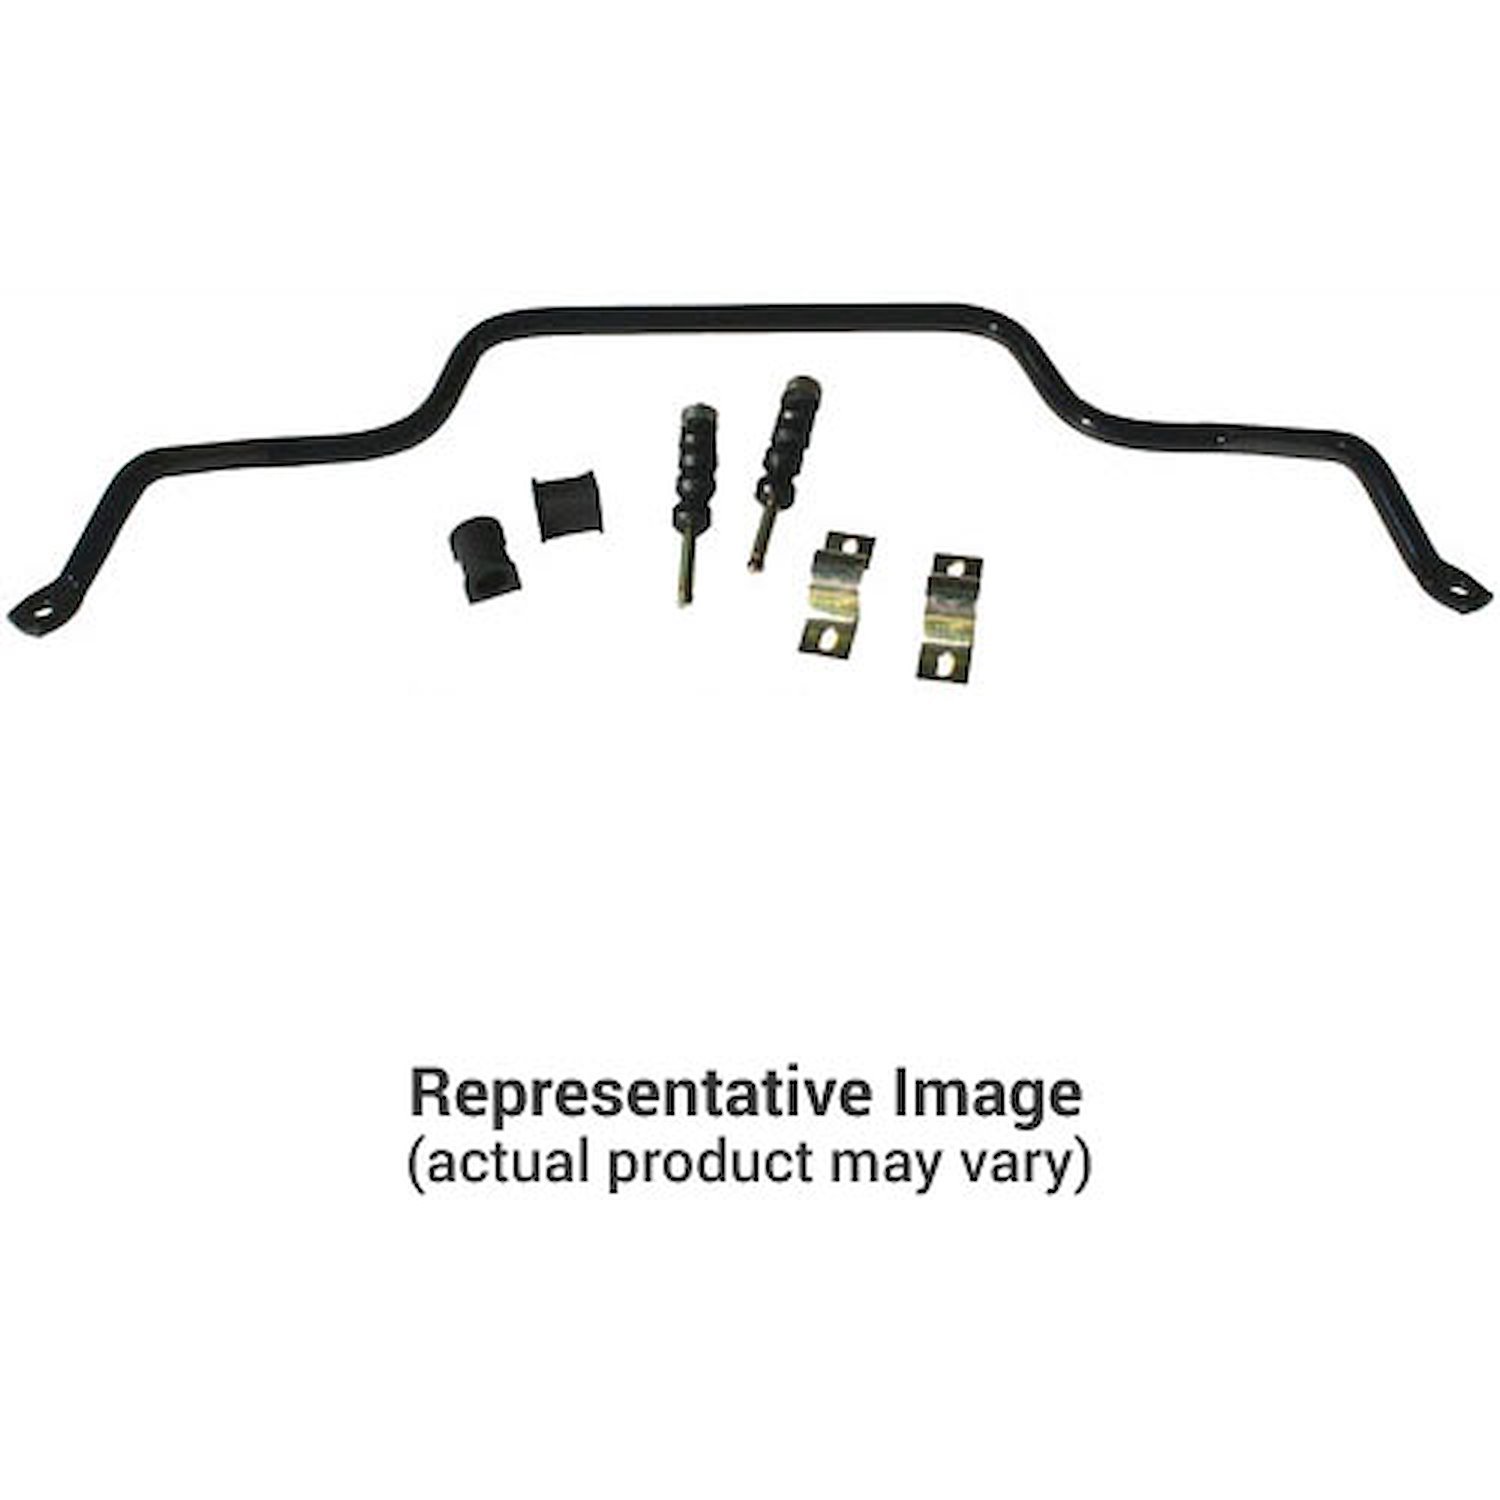 1-1/8" Rear Sway Bar 1994-96 G20, G30 and G35 Van, Sportvan and Class "C" Motorhome (Dual Rear Wheels and Over 6500 GVW)